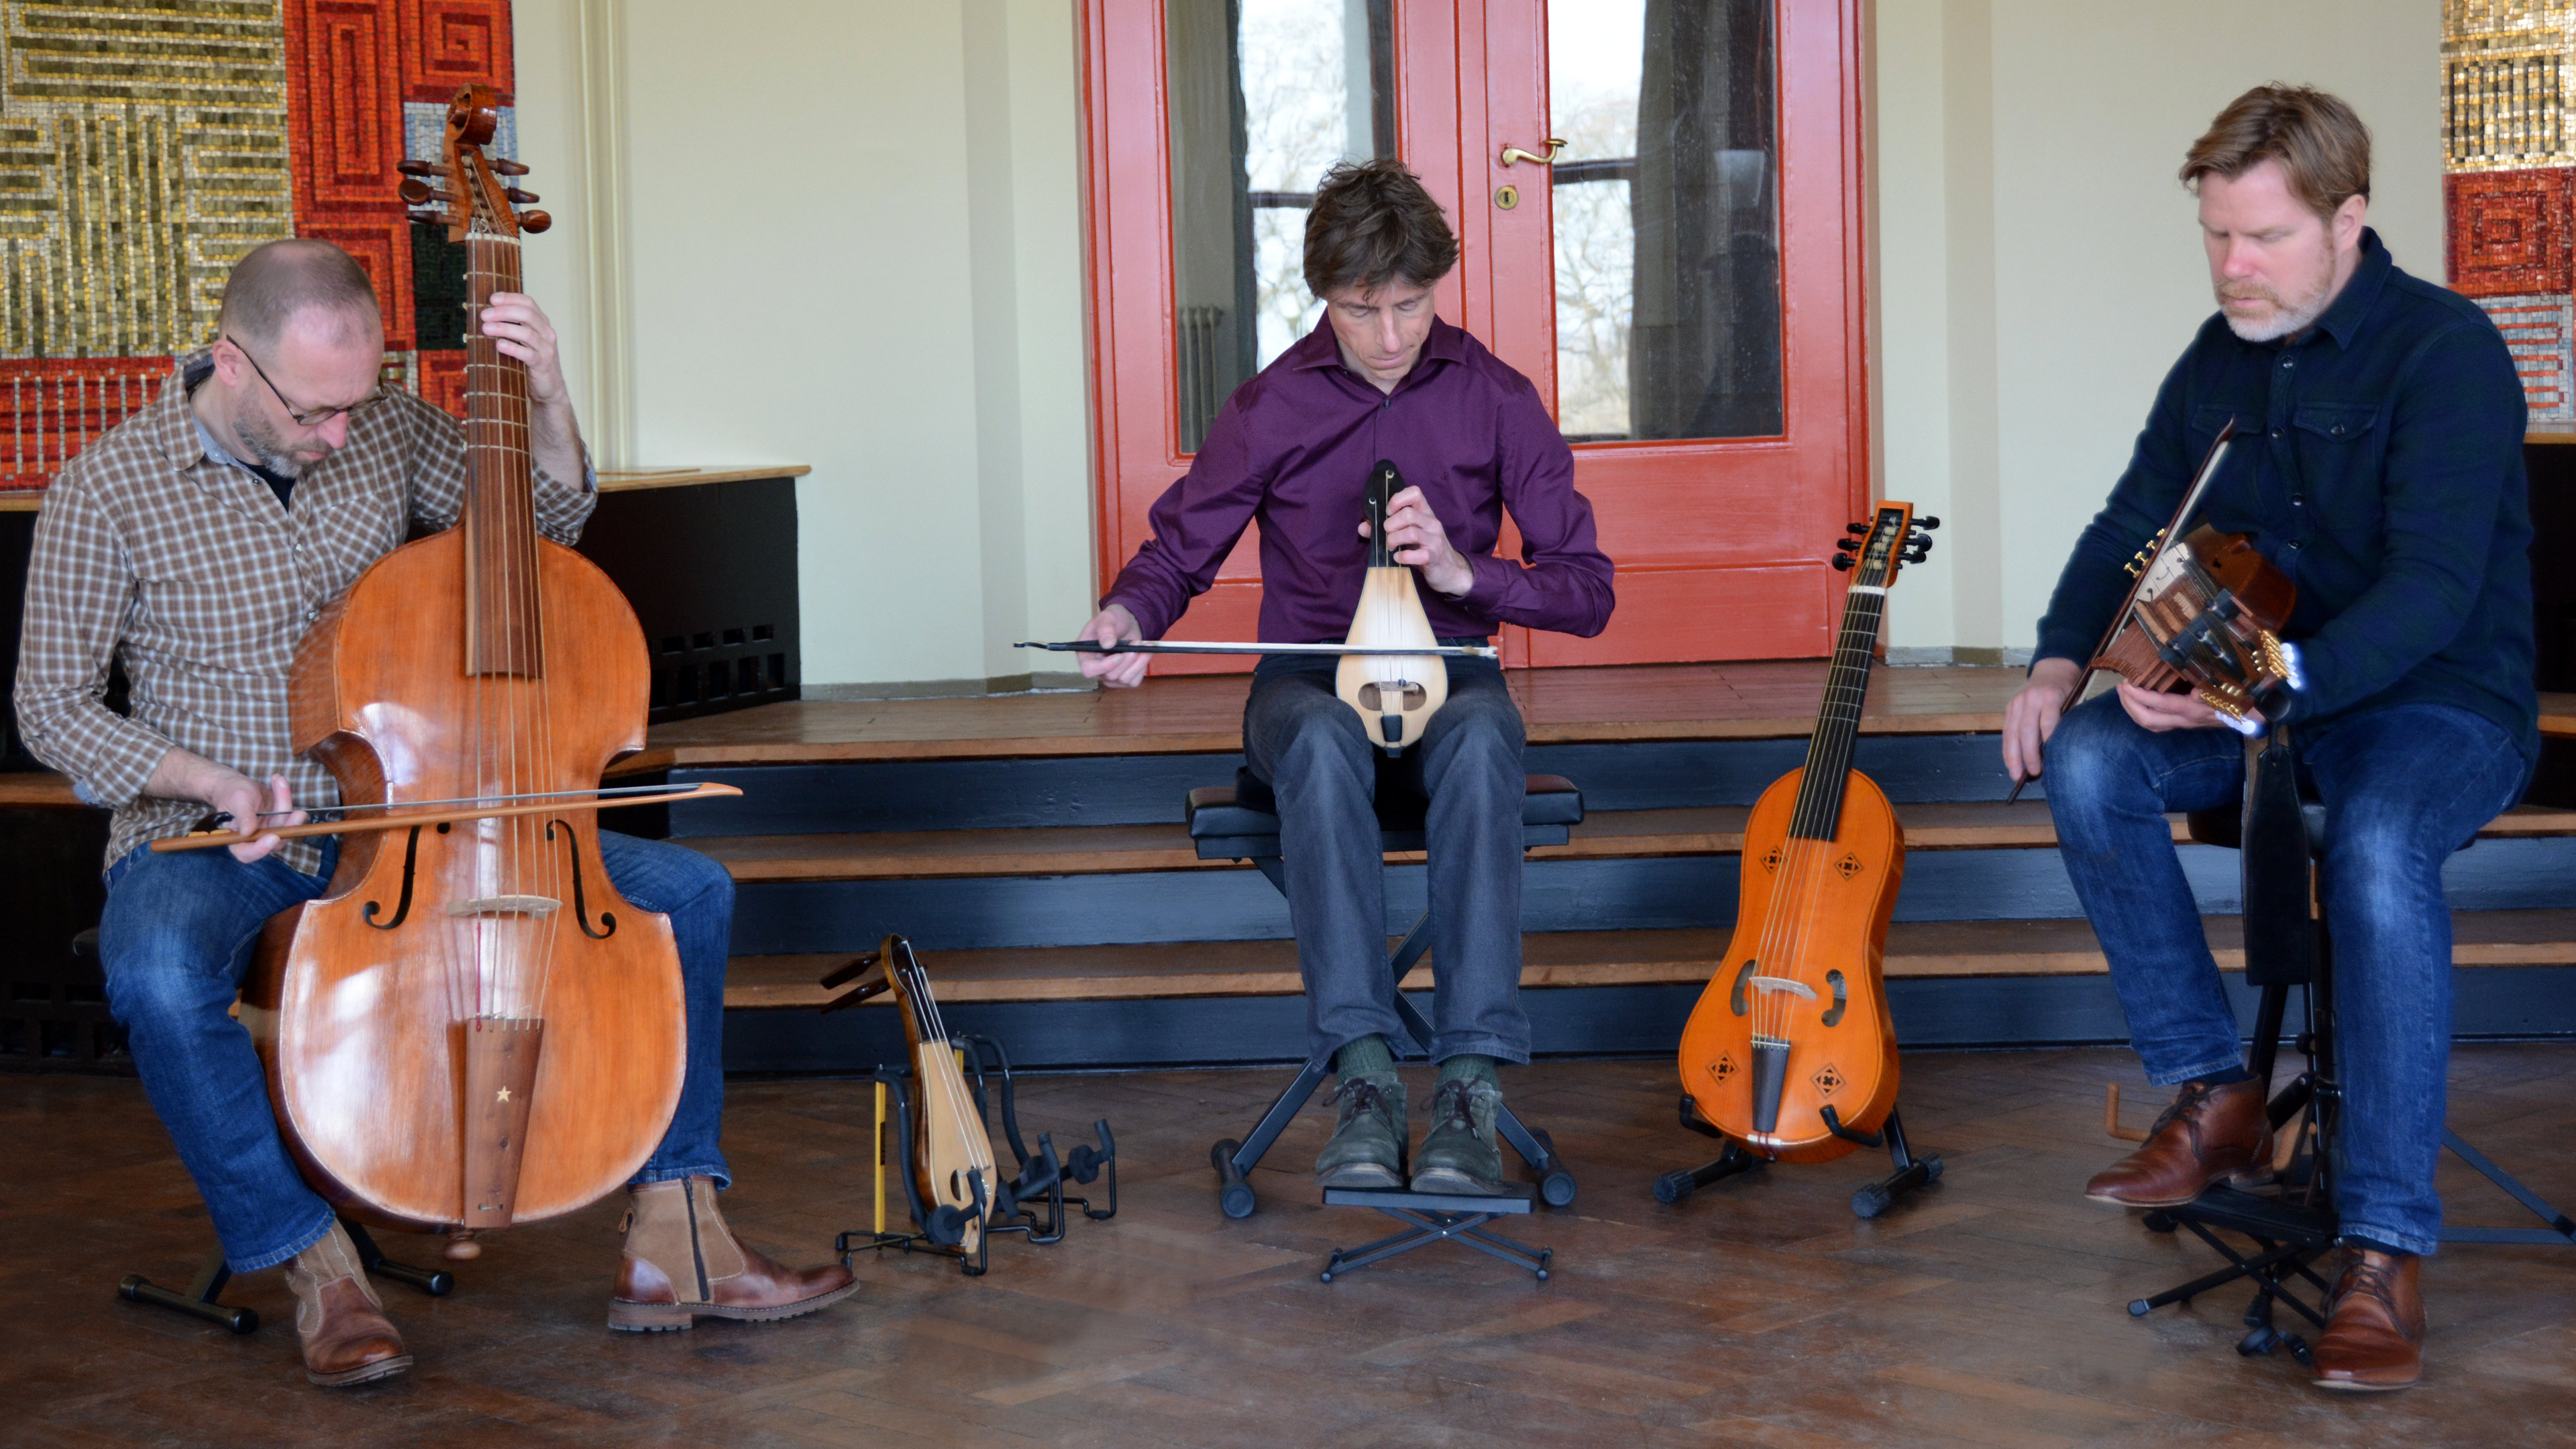 Viola da Gamba: Family Of Bowed, Fretted, And Stringed Instruments, Band Rehearsal. 3840x2160 4K Background.